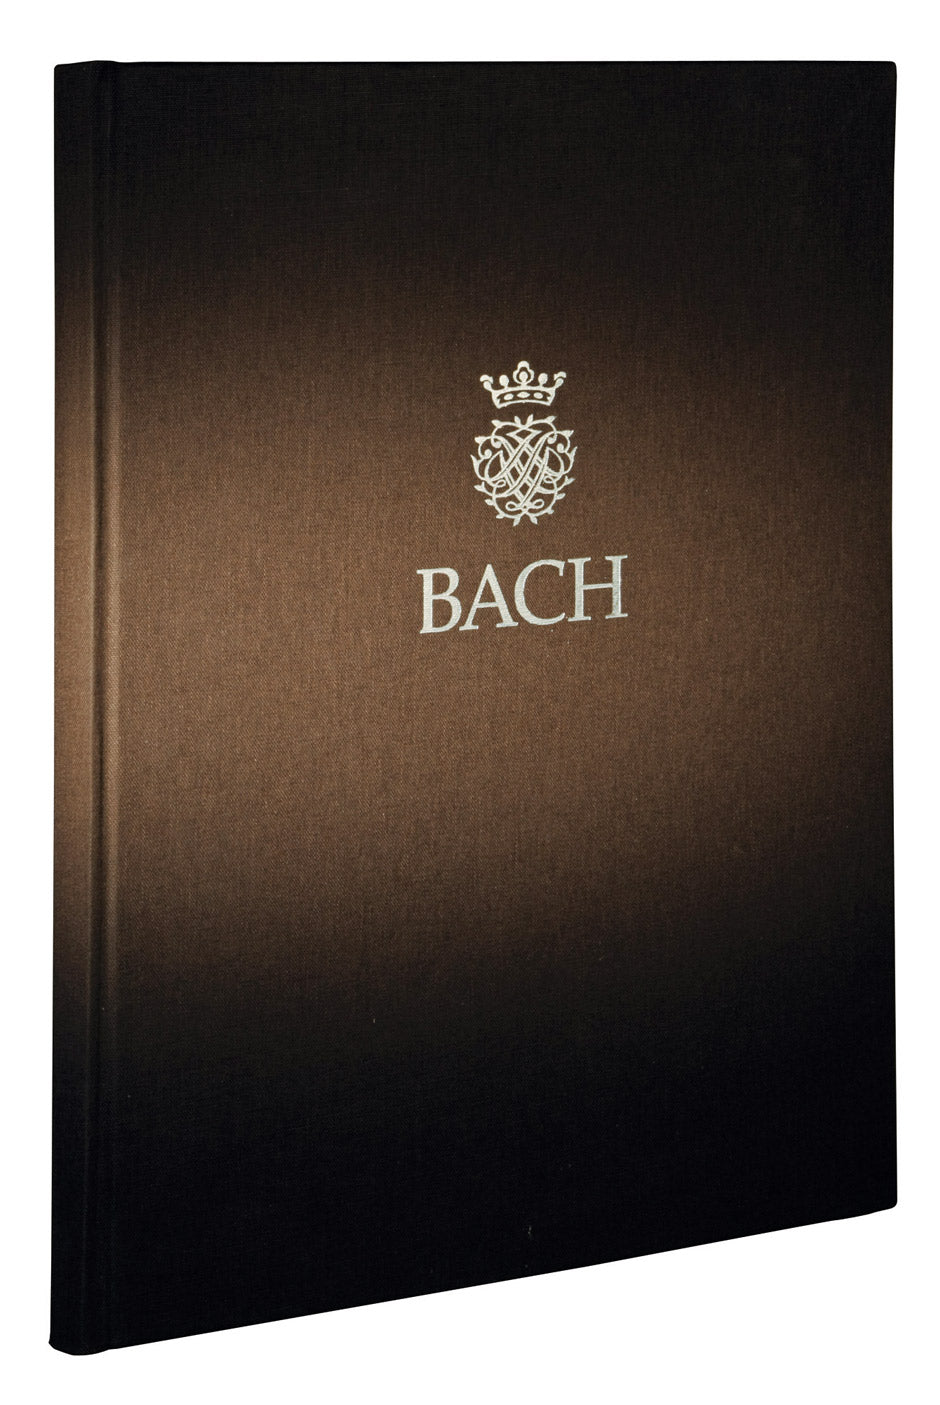 Bach: 6 Suites for Solo Cello, BWV 1007-1012